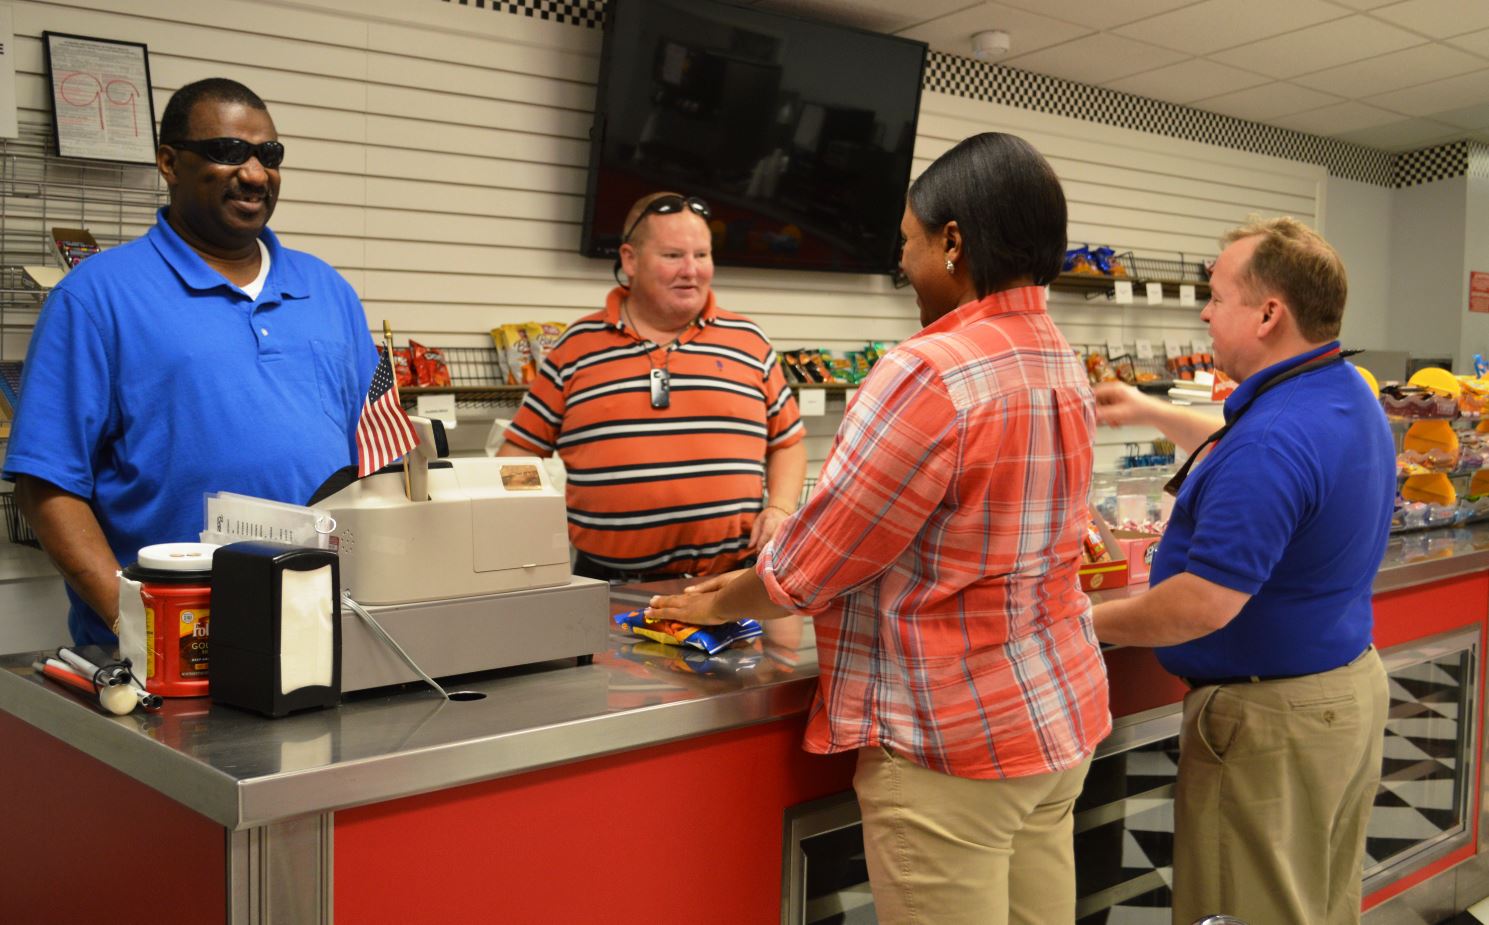 Four subjects in food vending counter smiling and talking with each other: the adult African American male working the cash register is blind. He is behind the counter with an adult white male coworker and both are speaking with two customers, an adult African American female and an adult white male.